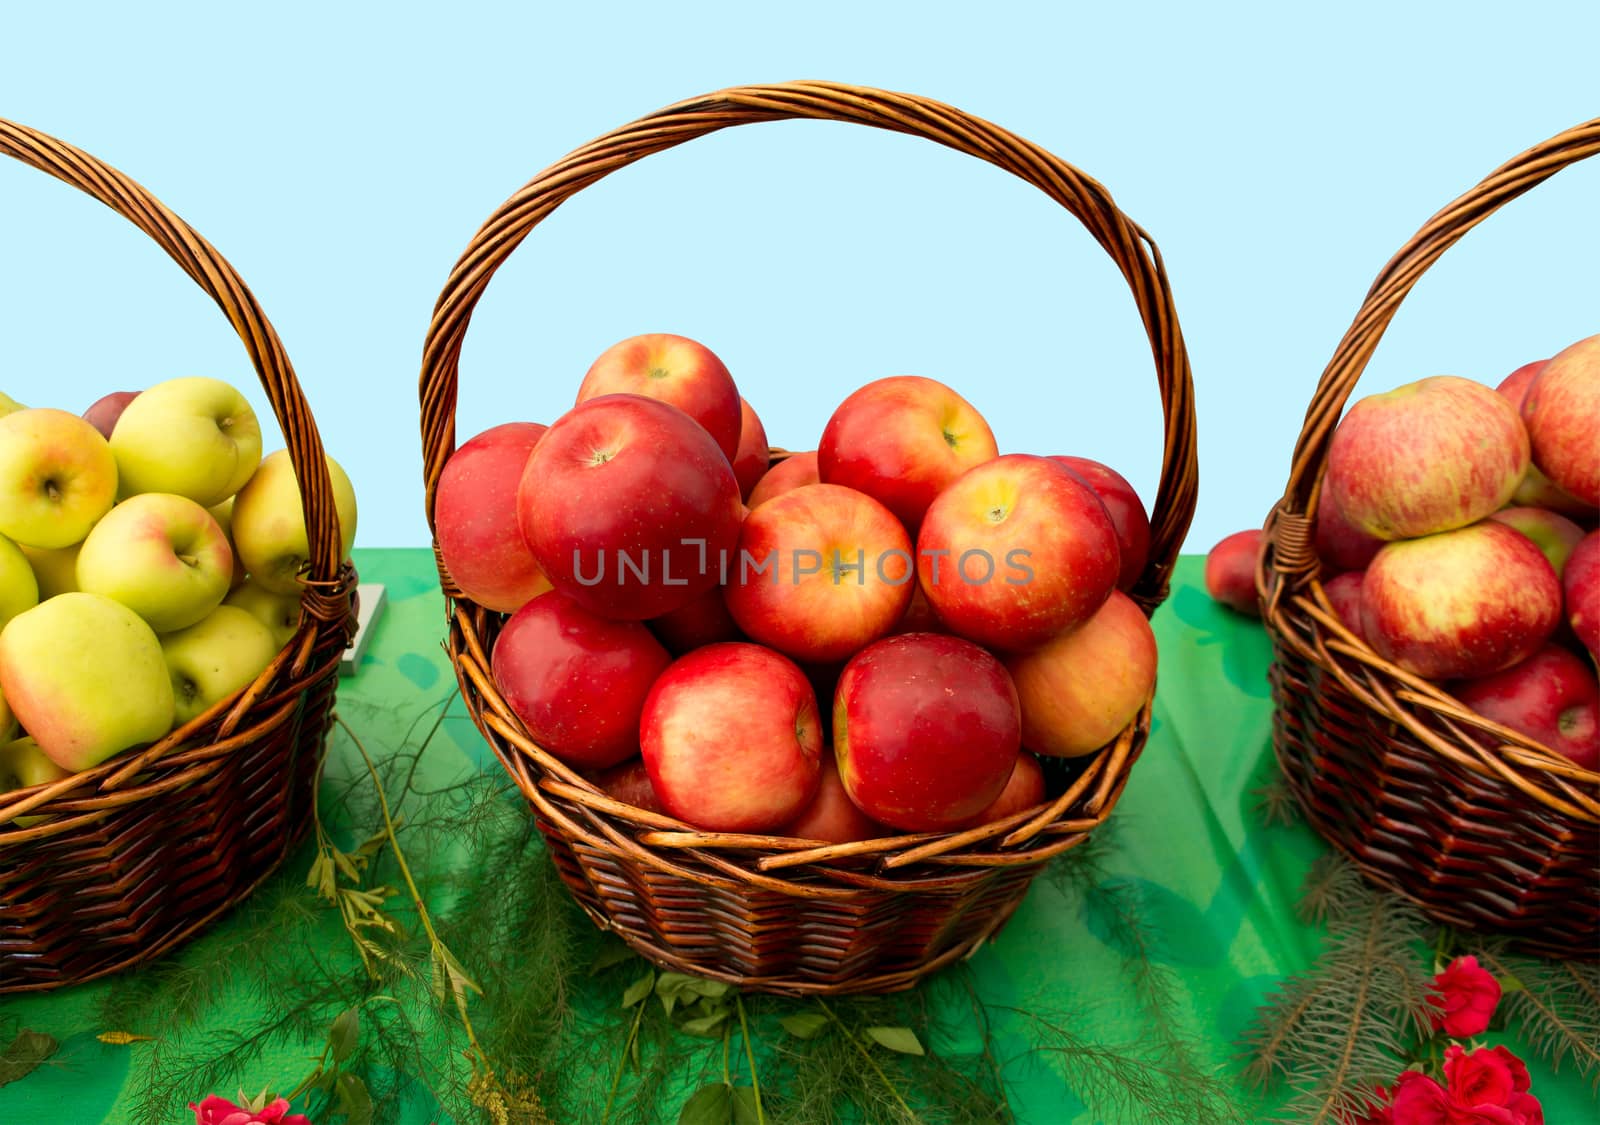 Fresh apples in wicker baskets. Clipping path included.